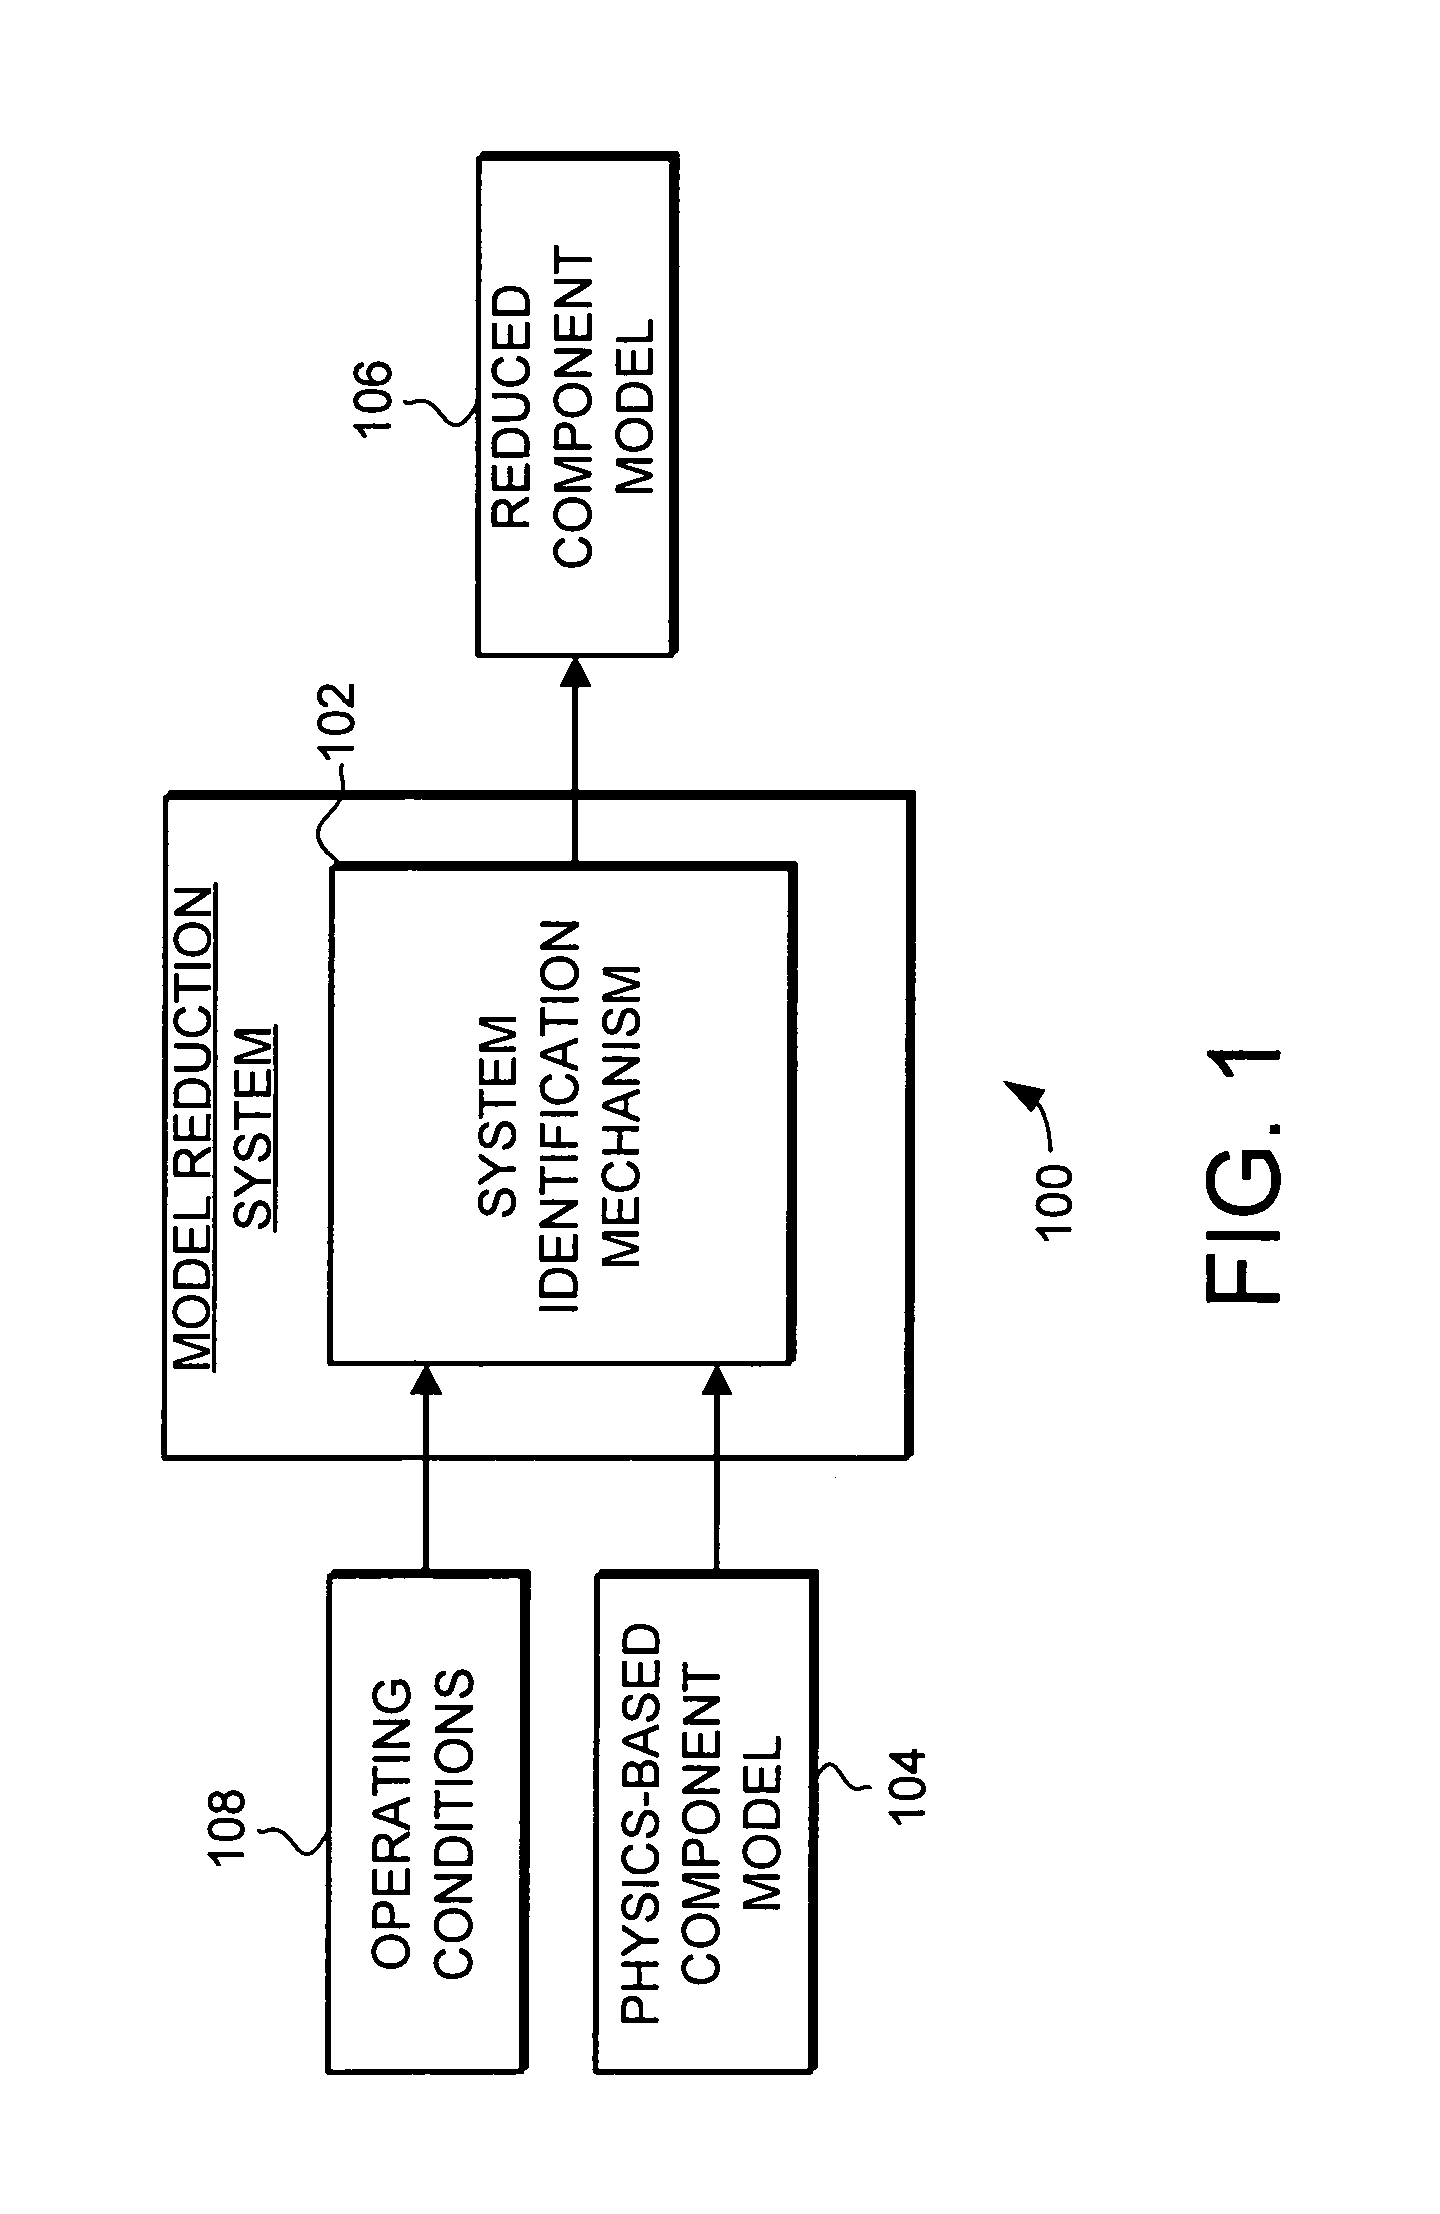 Model reduction system and method for component lifing